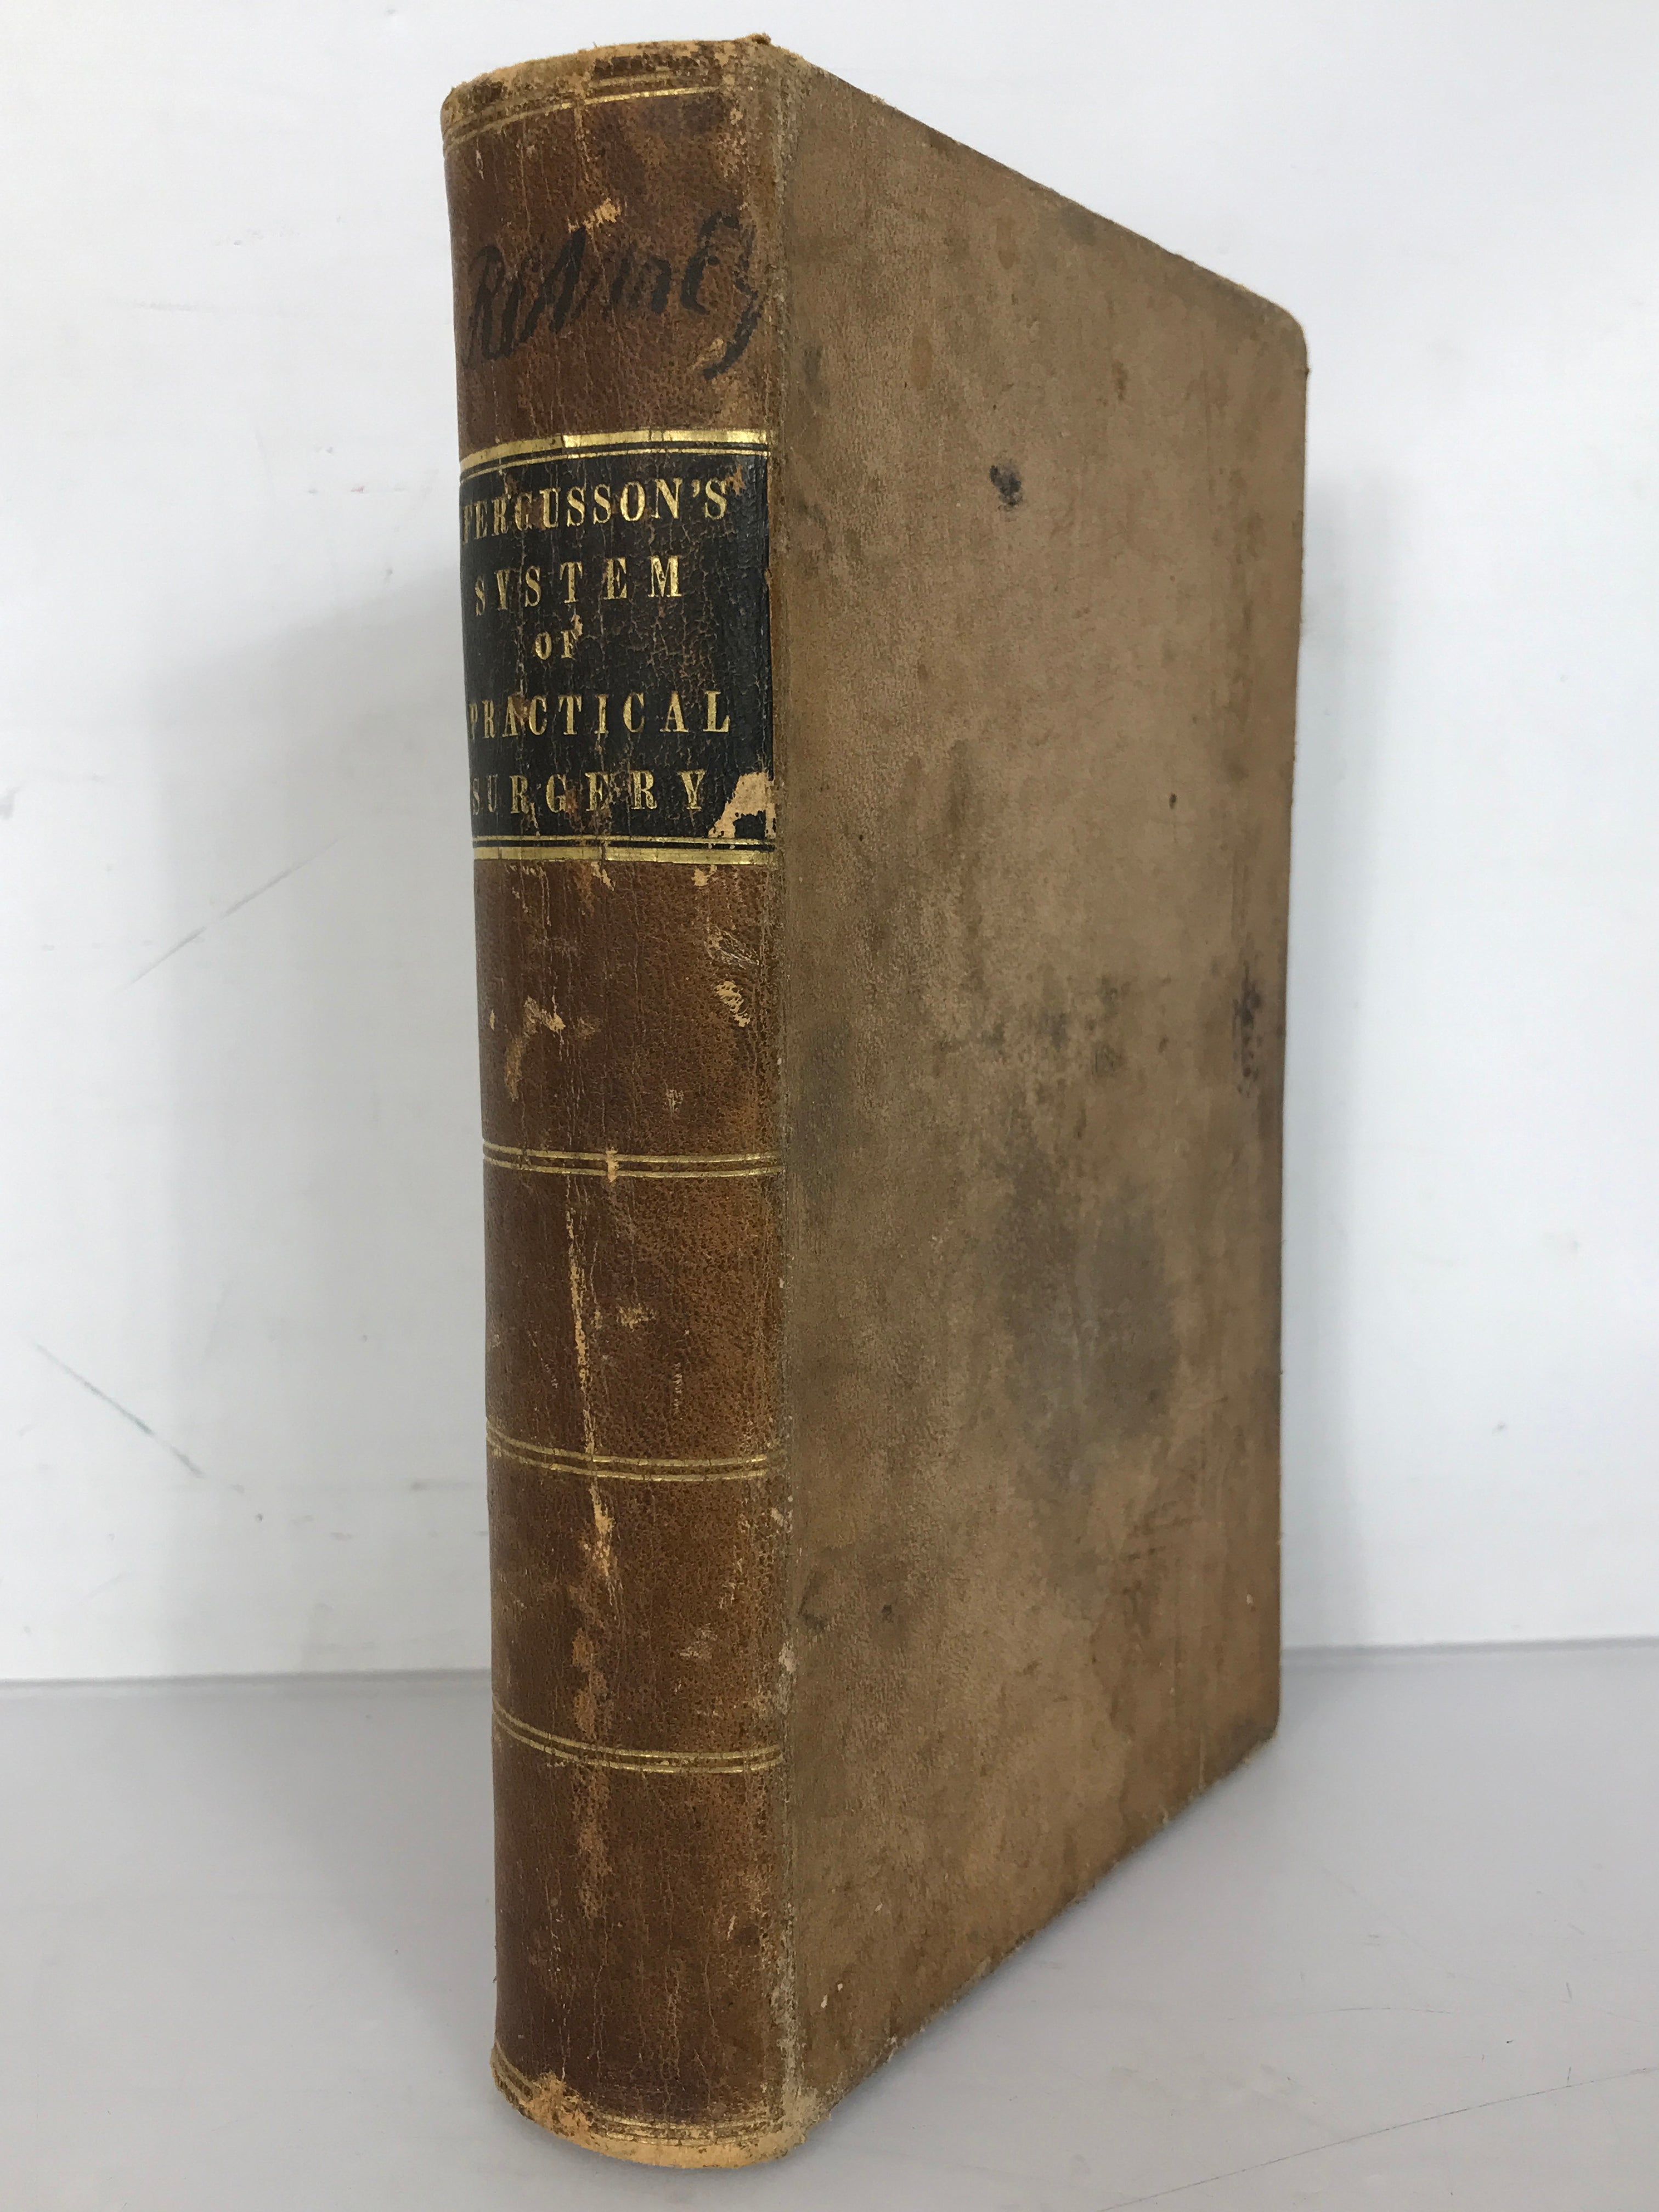 A System of Practical Surgery by William Fergusson 1853 HC